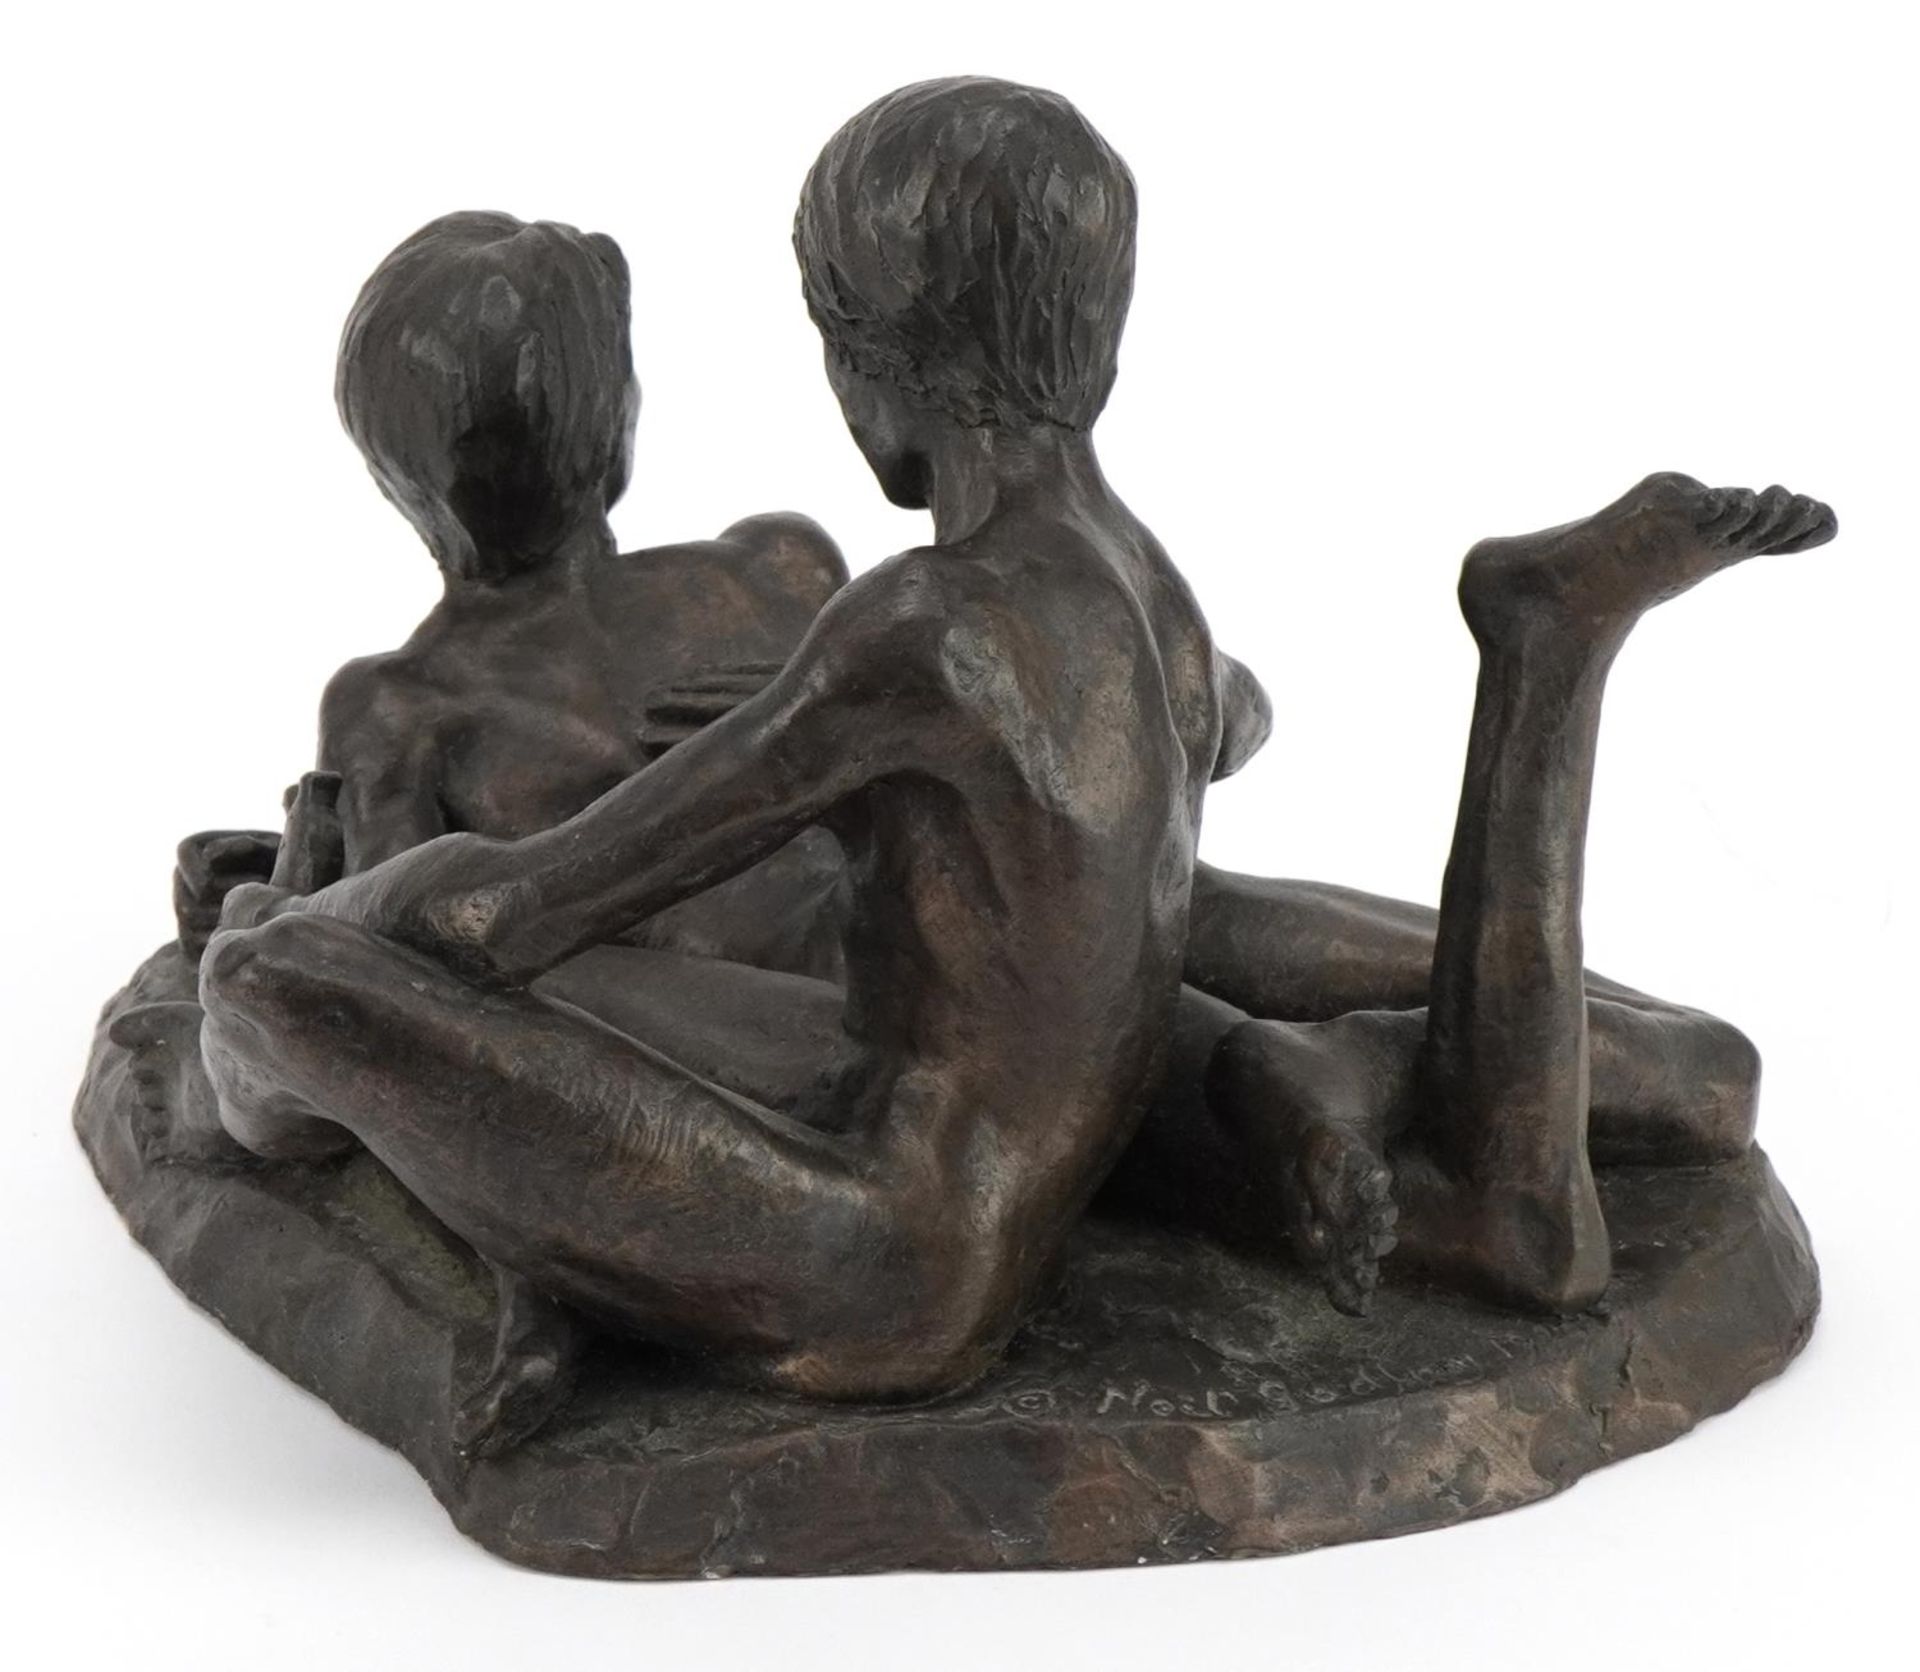 Neil Godfrey 1989, contemporary cold cast bronze sculpture of a group of two nude young males - Image 3 of 5